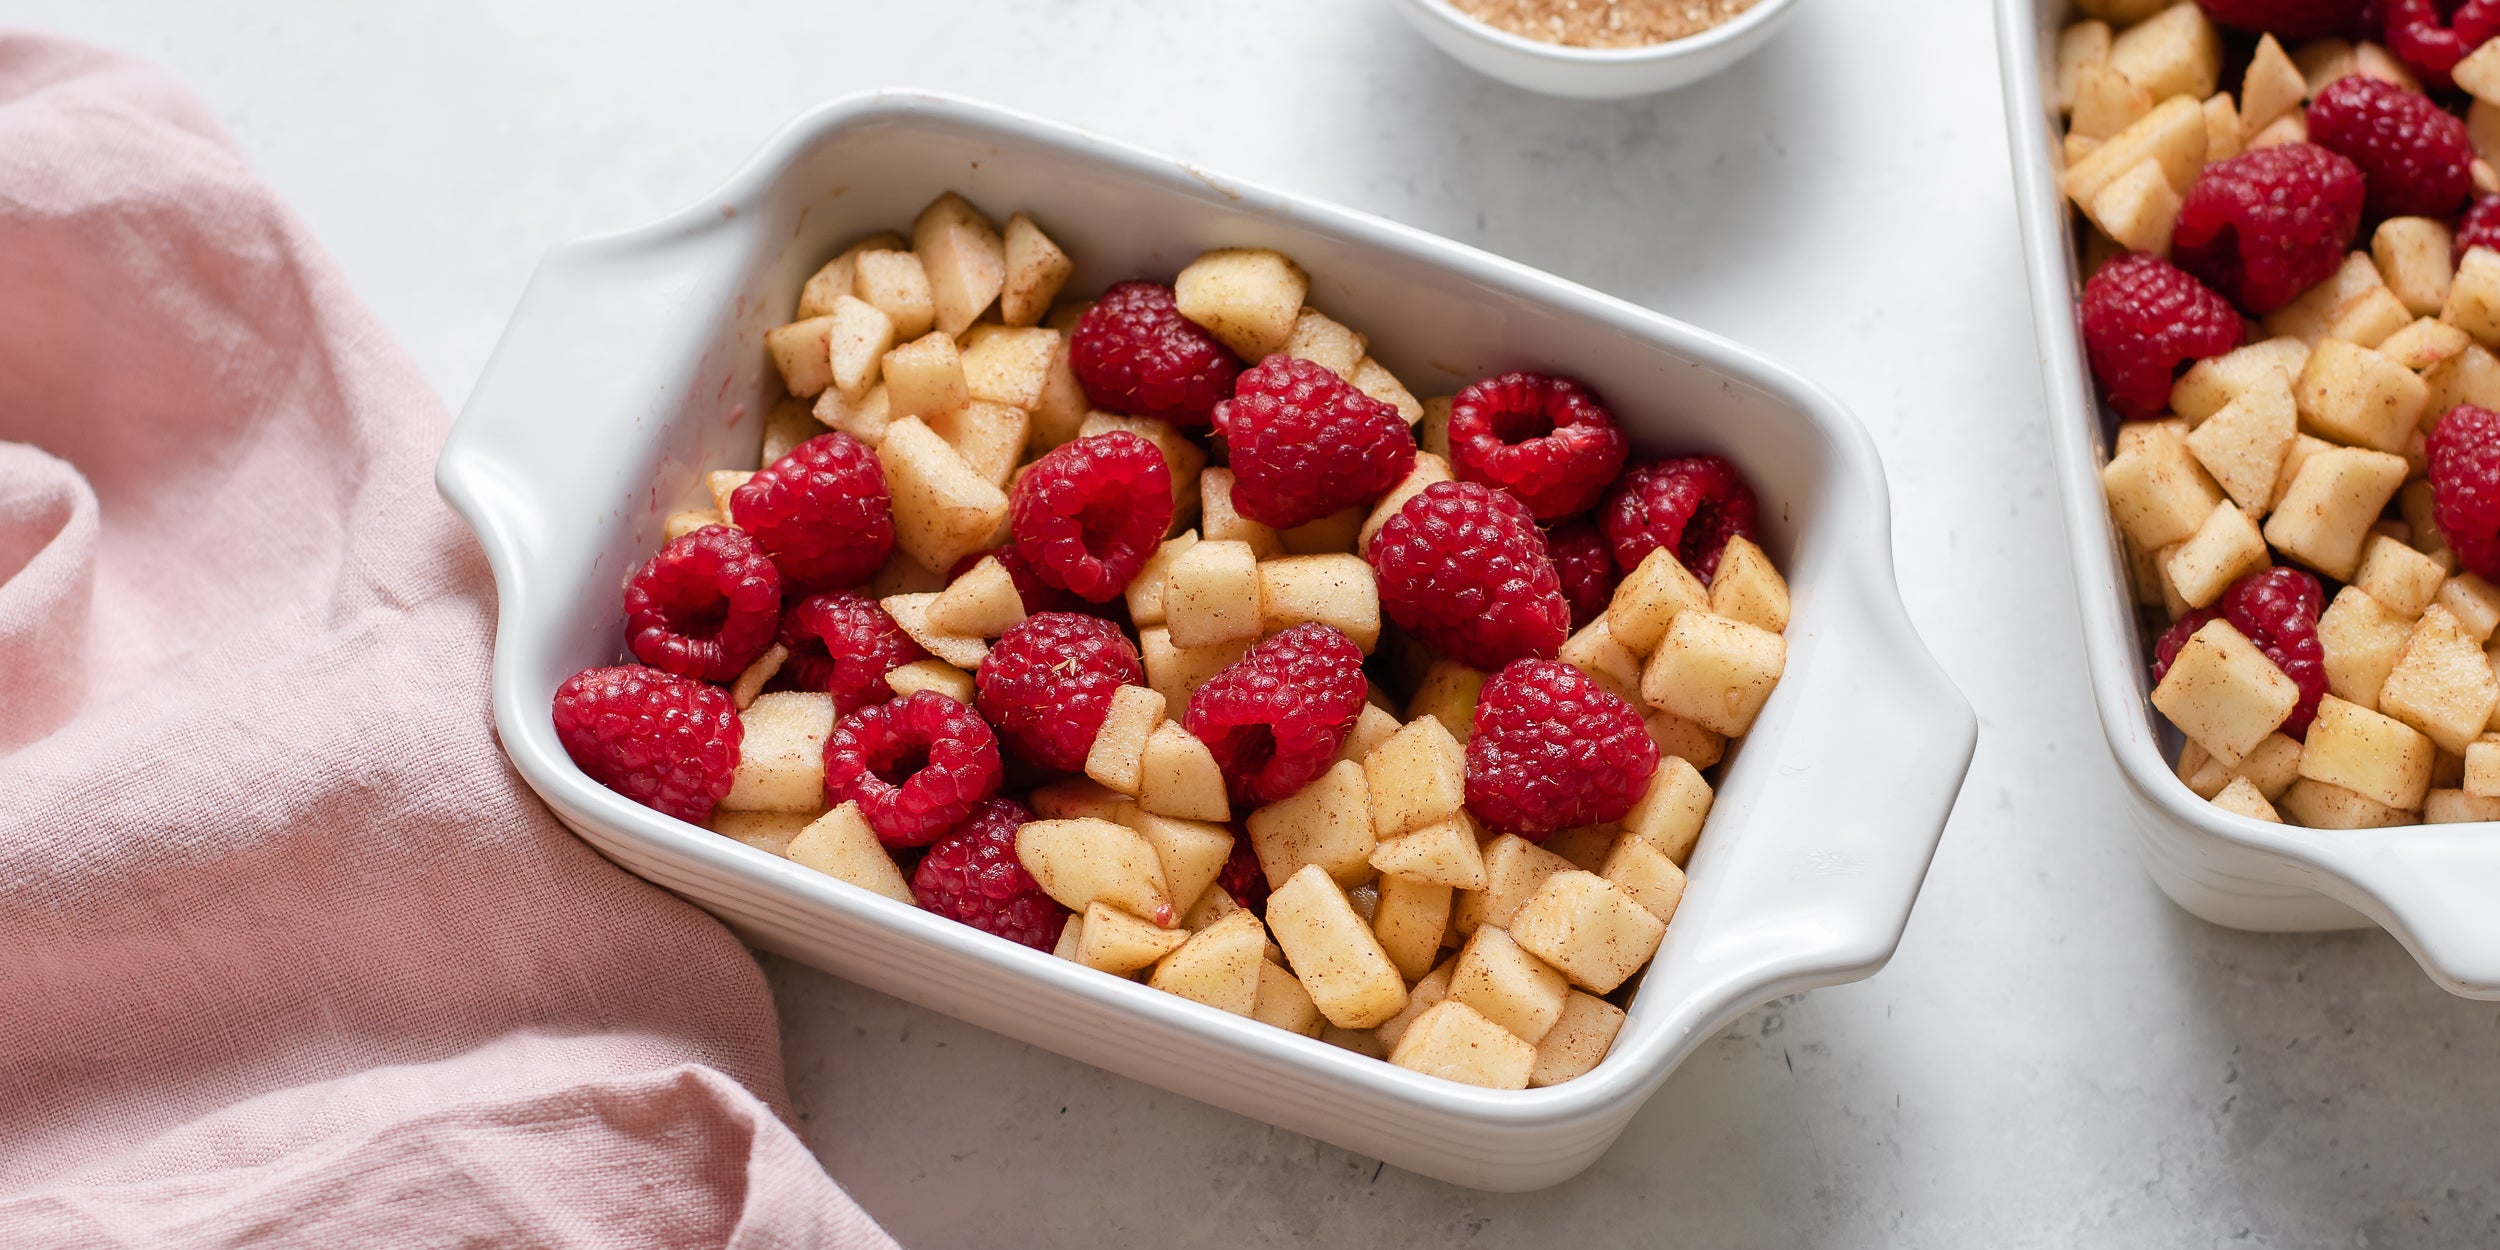 Chopped apple and fresh raspberries in a baking dish ready to top with crumble topping before baking in the oven